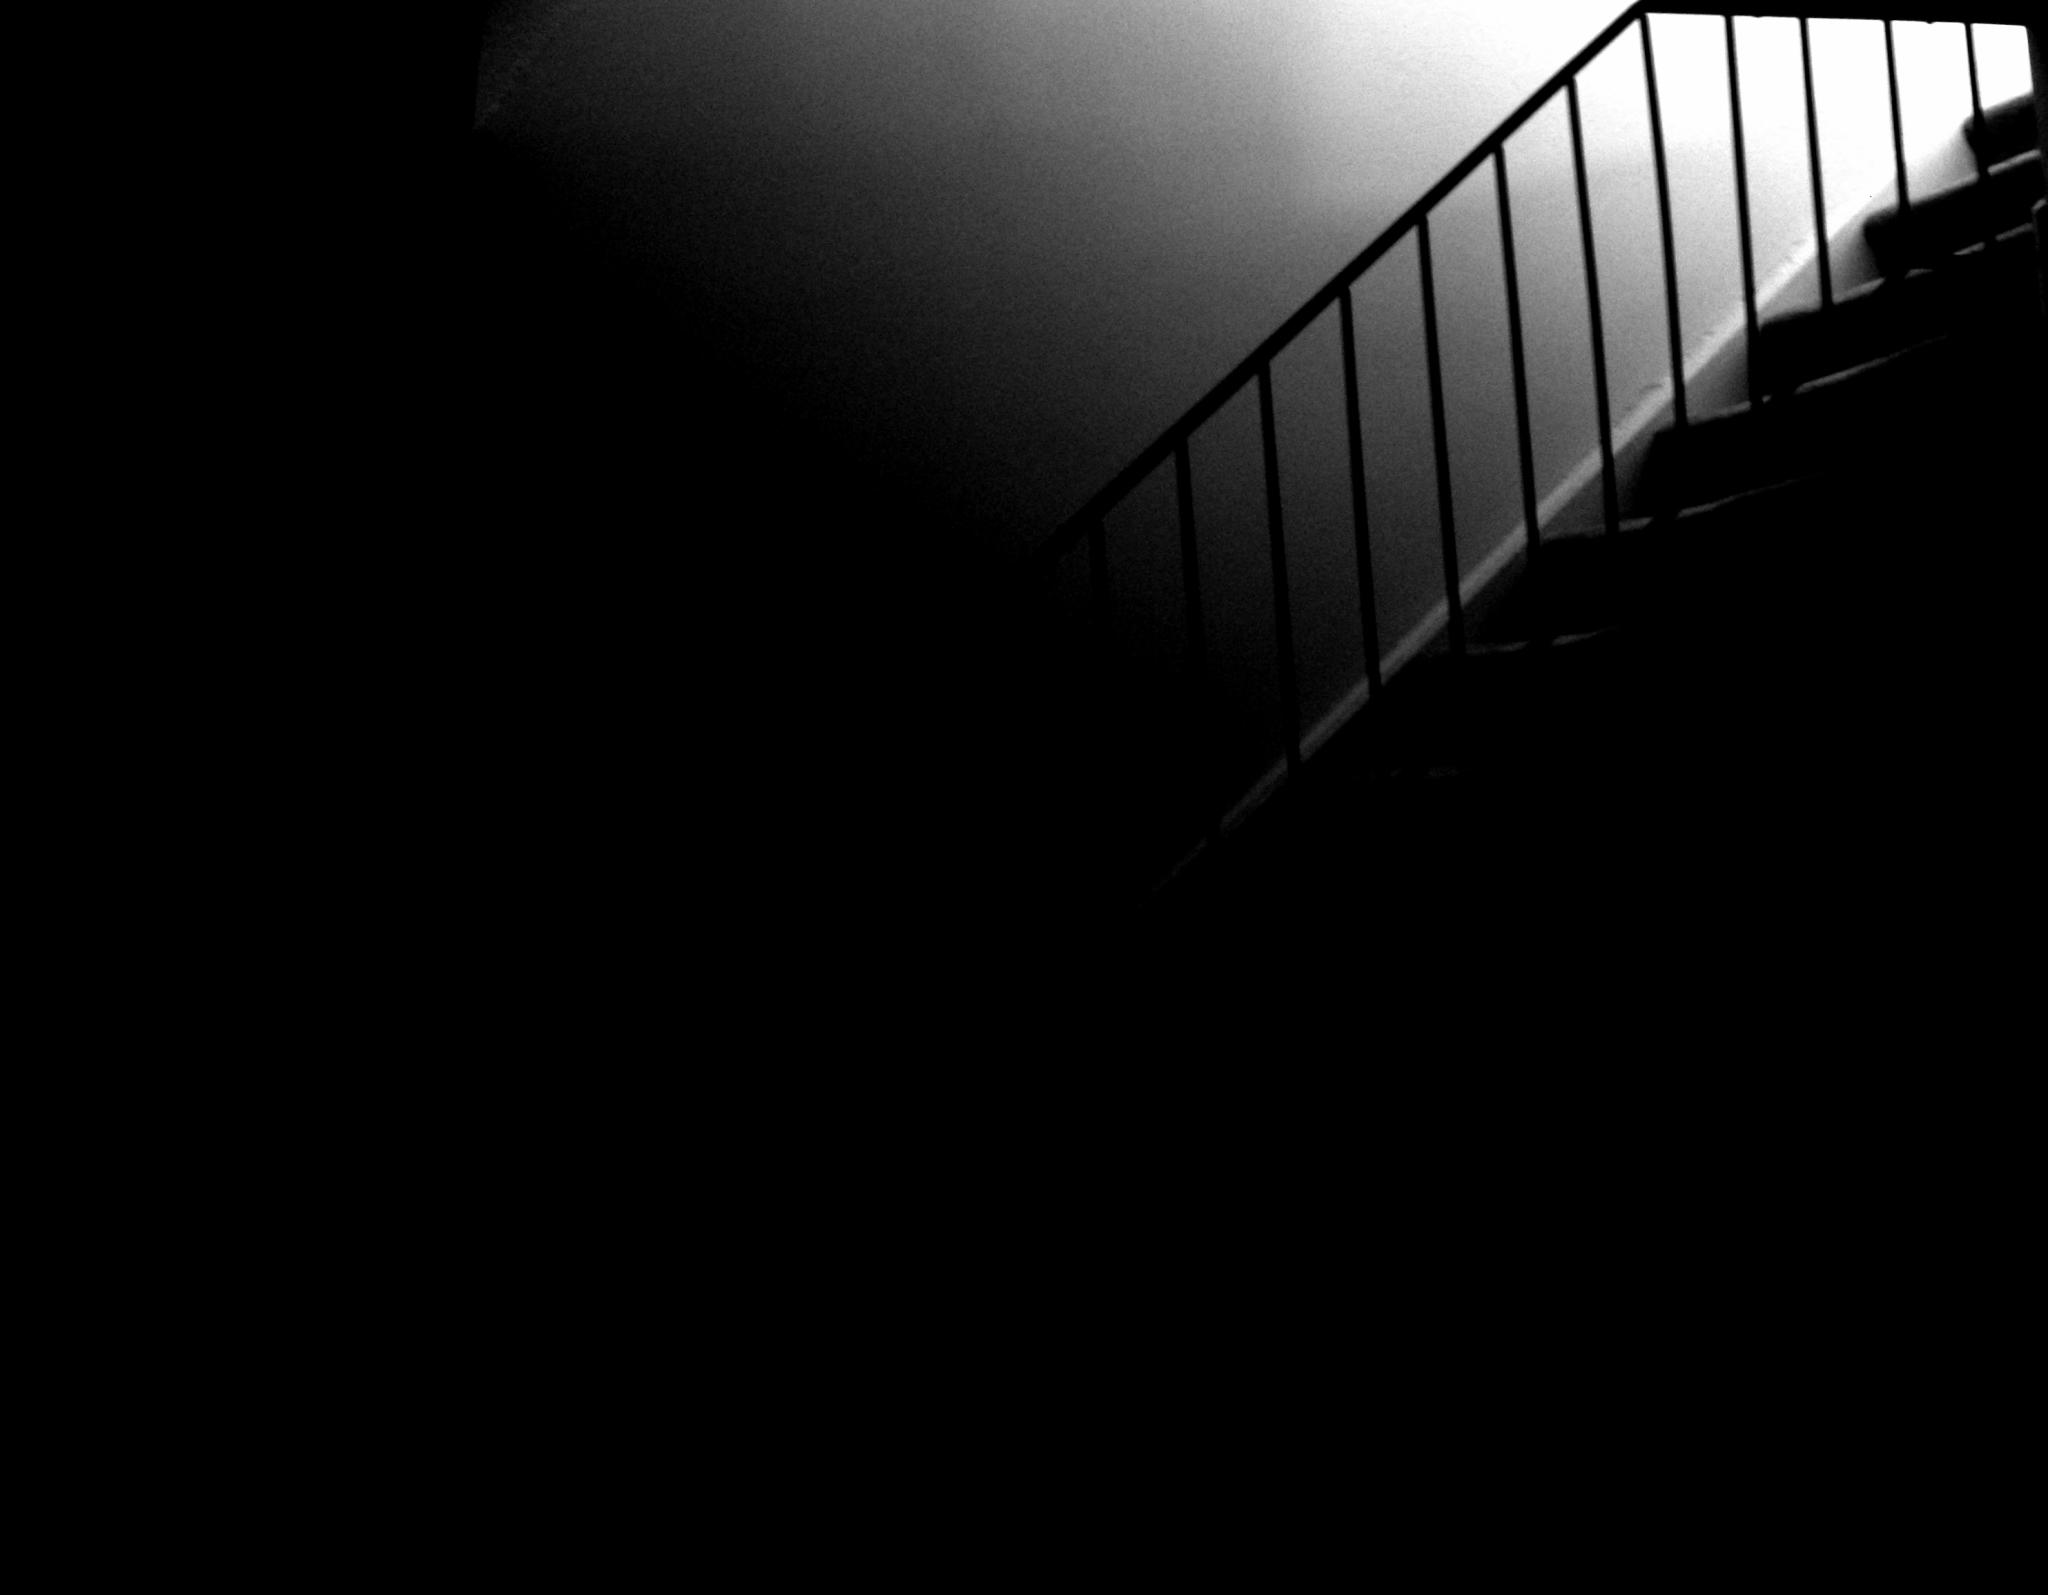 black and white pograph of the handrail of a stair case